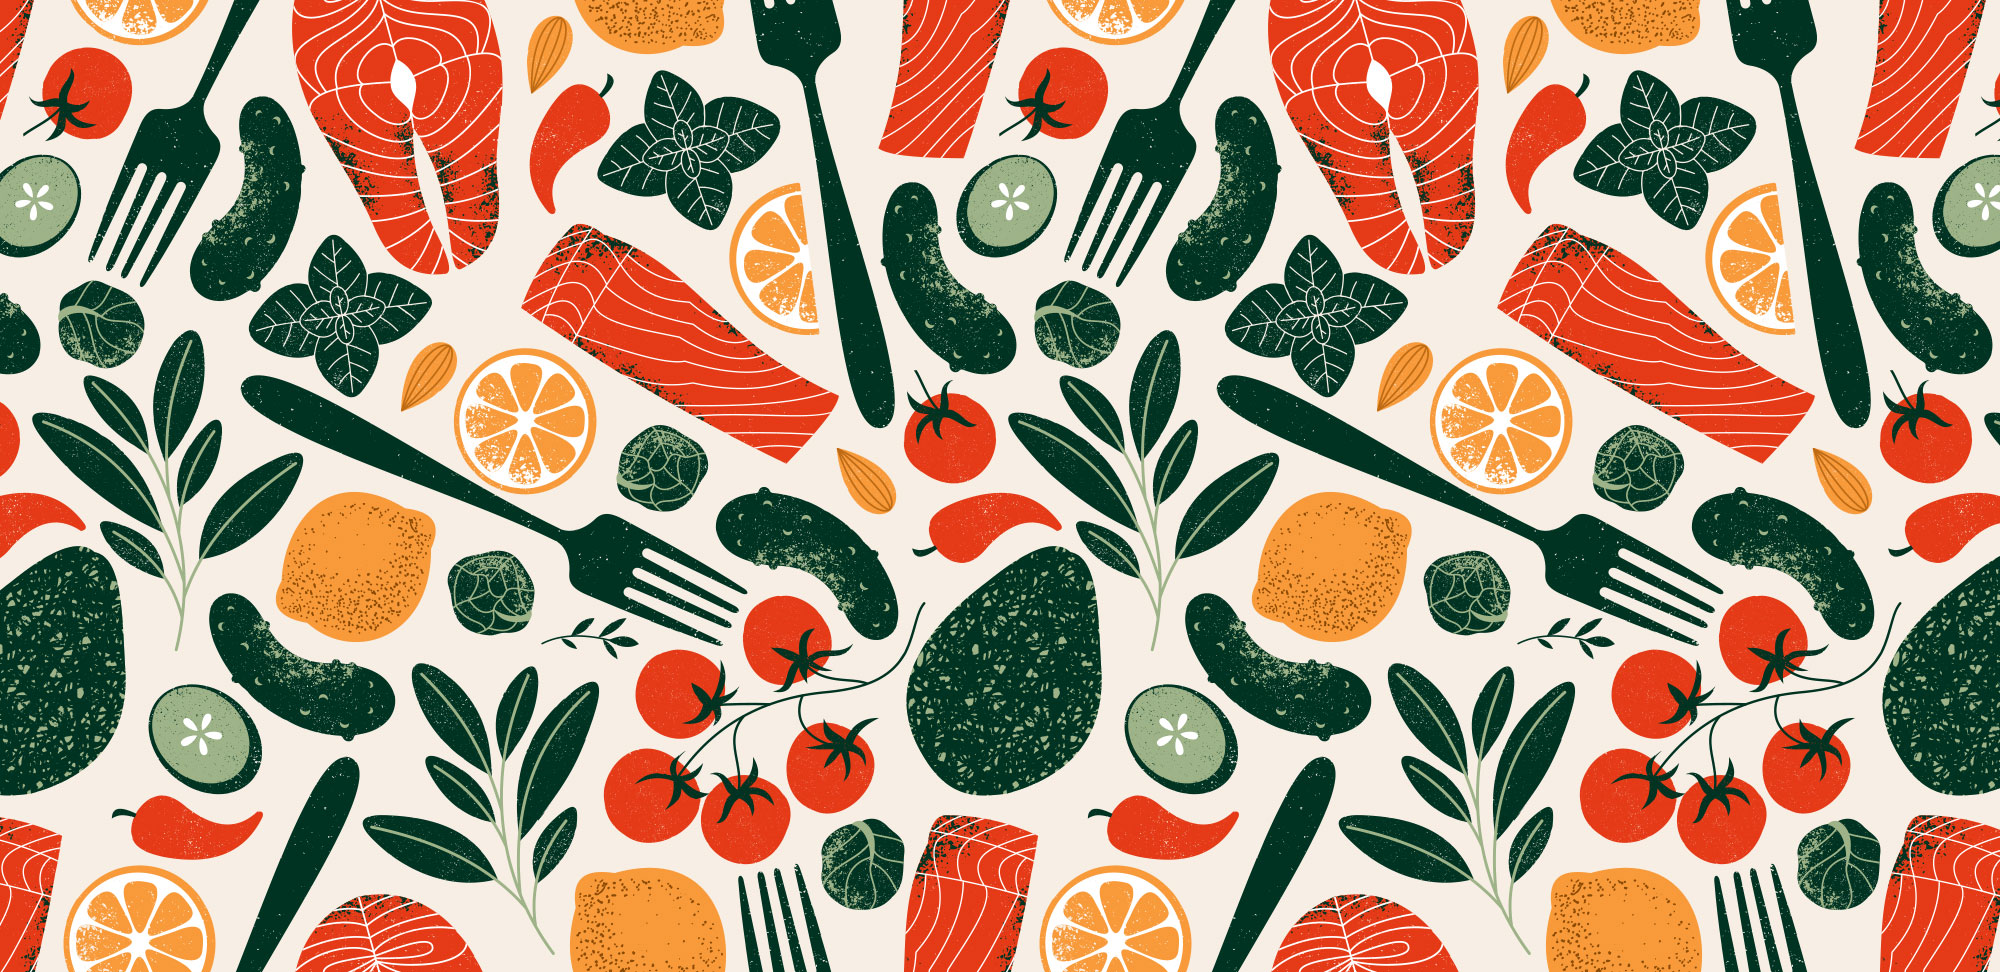 Illustration of Healthy food seamless pattern. Salmon with avocado and cucumbers.